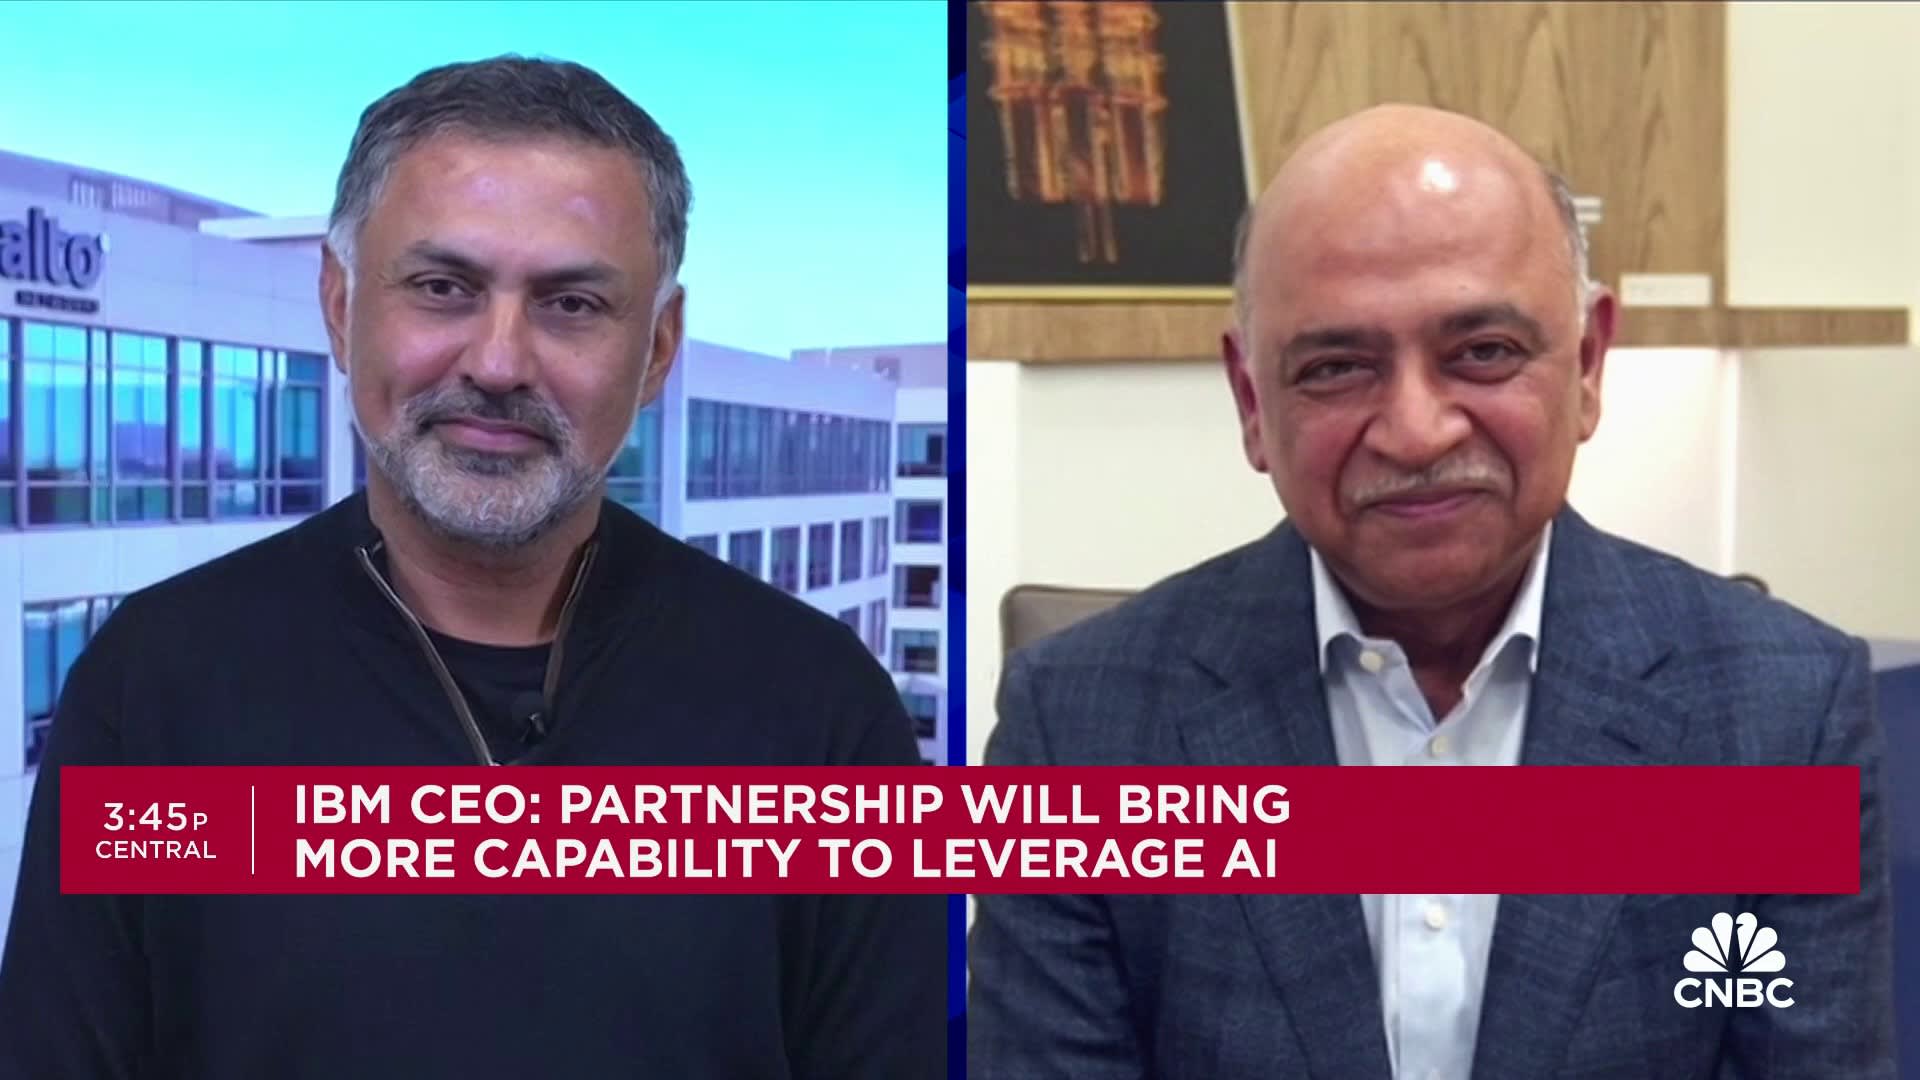 Watch CNBC’s full interview with IBM CEO Arvind Krishna and Palo Alto Networks’ CEO Nikesh Arora [Video]